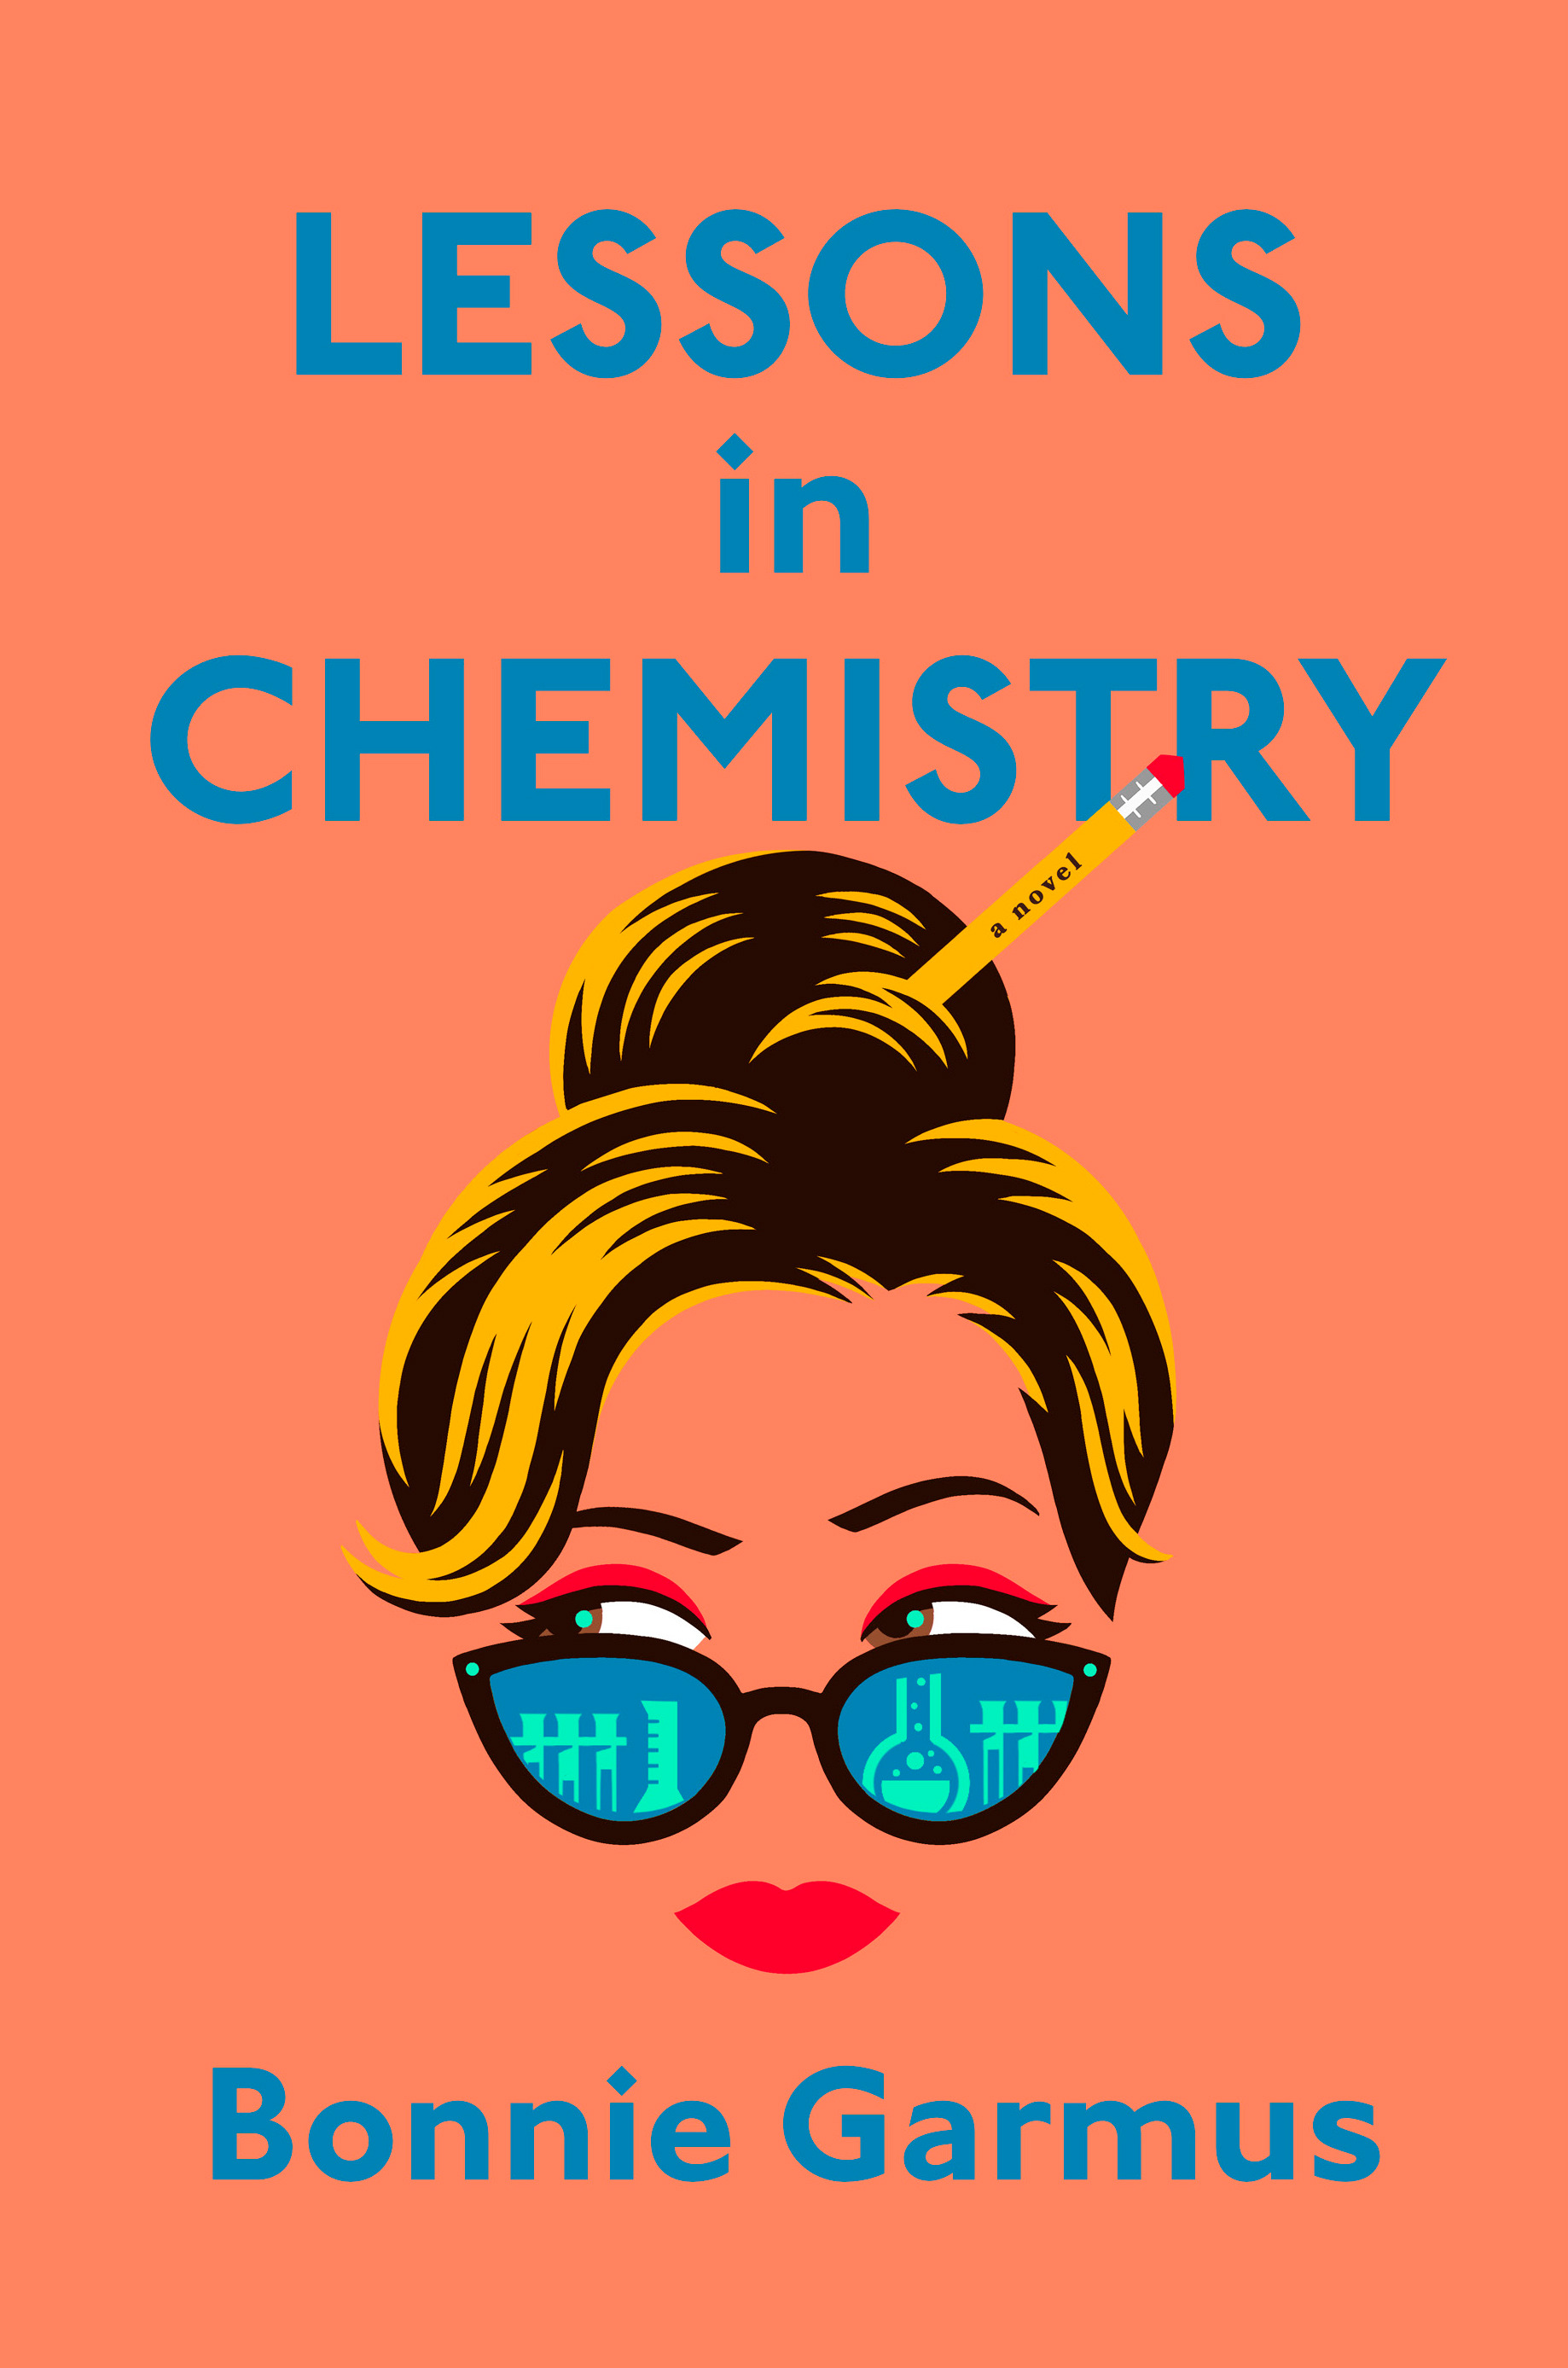 Lessons in Chemistry by Bonnie Garmus A review pic